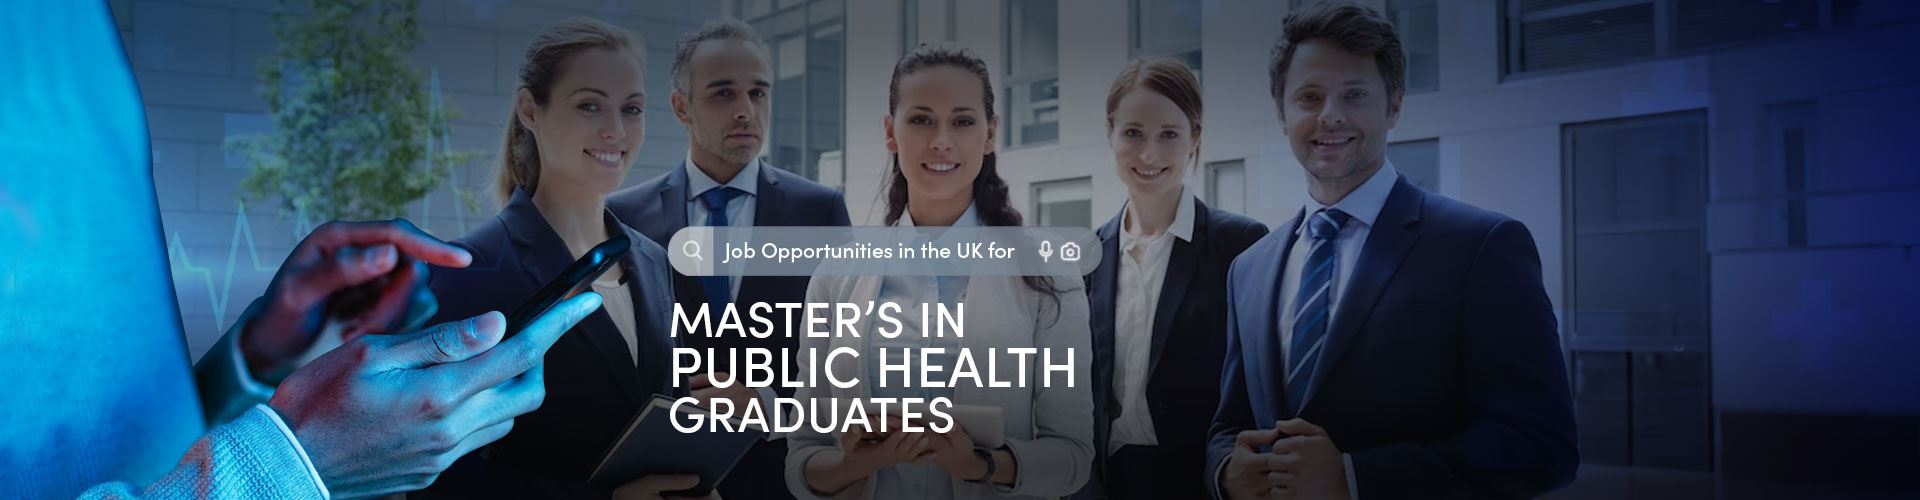 Job Opportunities in the UK for Master’s in Public Health Graduates